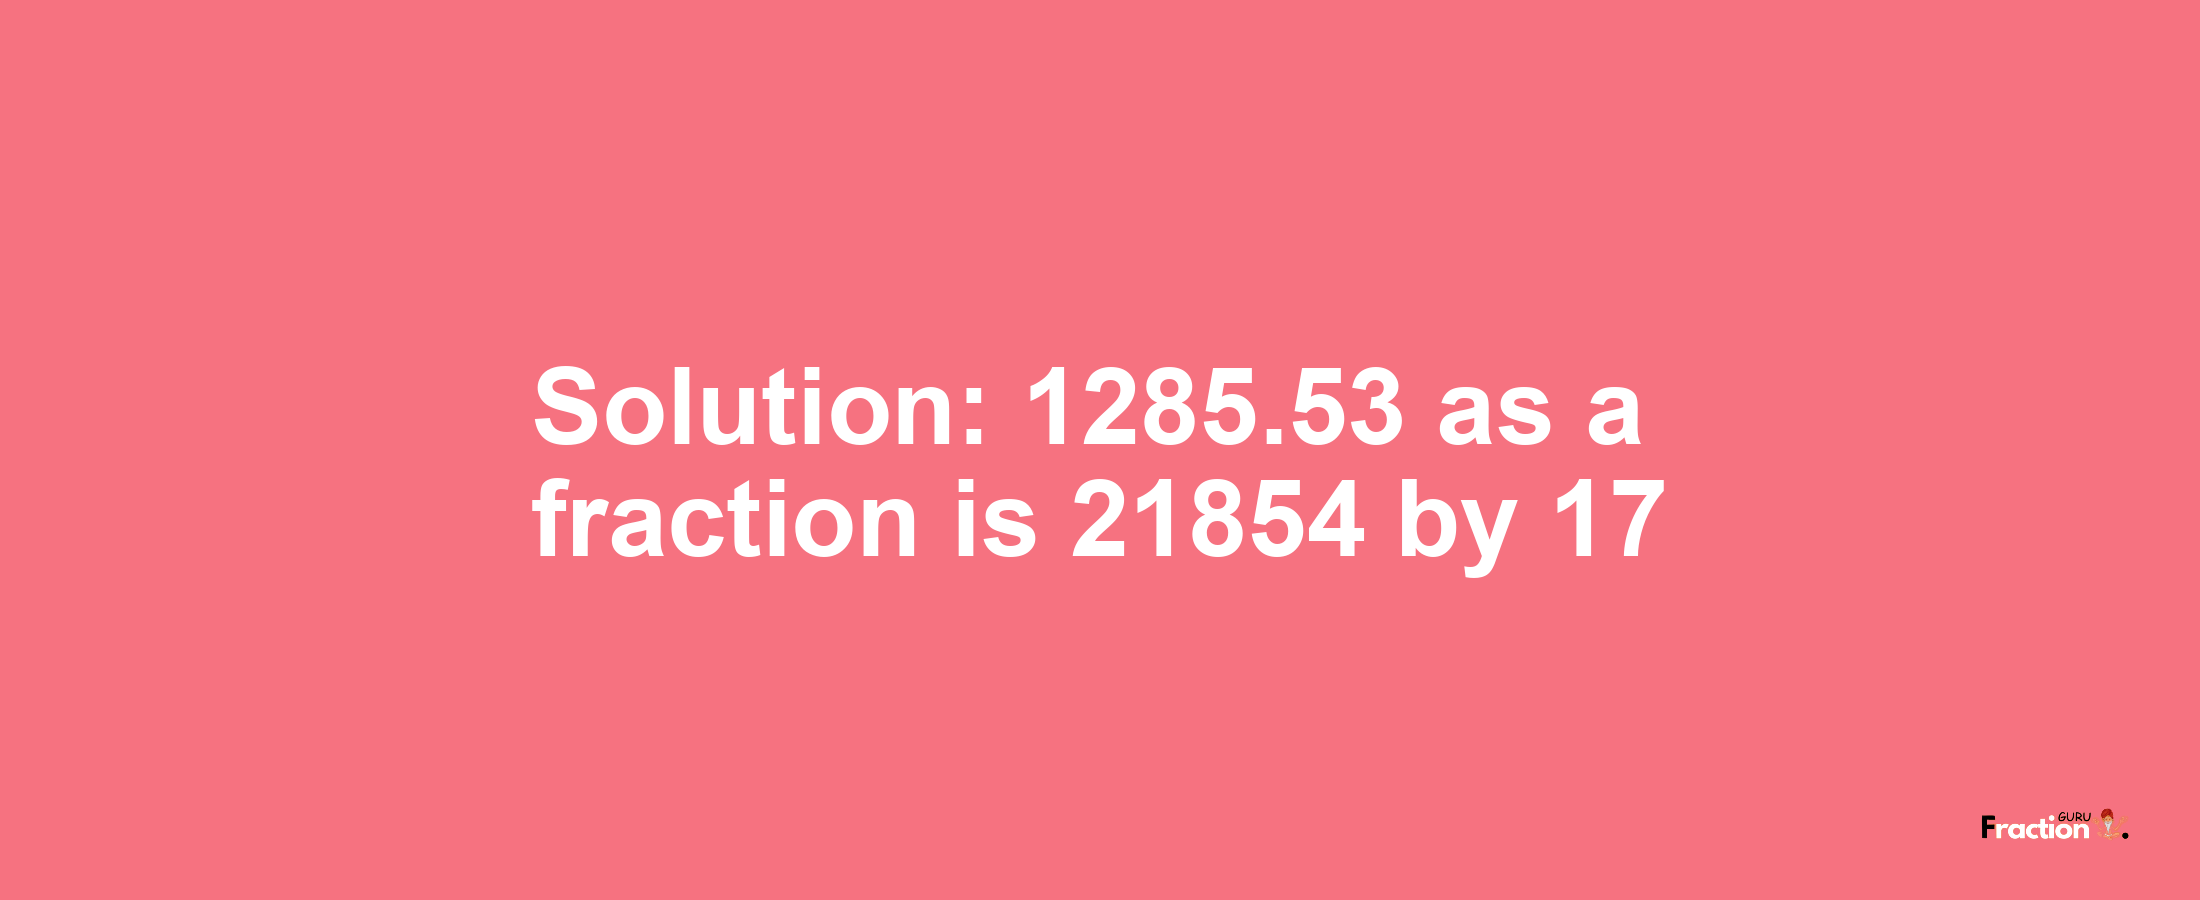 Solution:1285.53 as a fraction is 21854/17